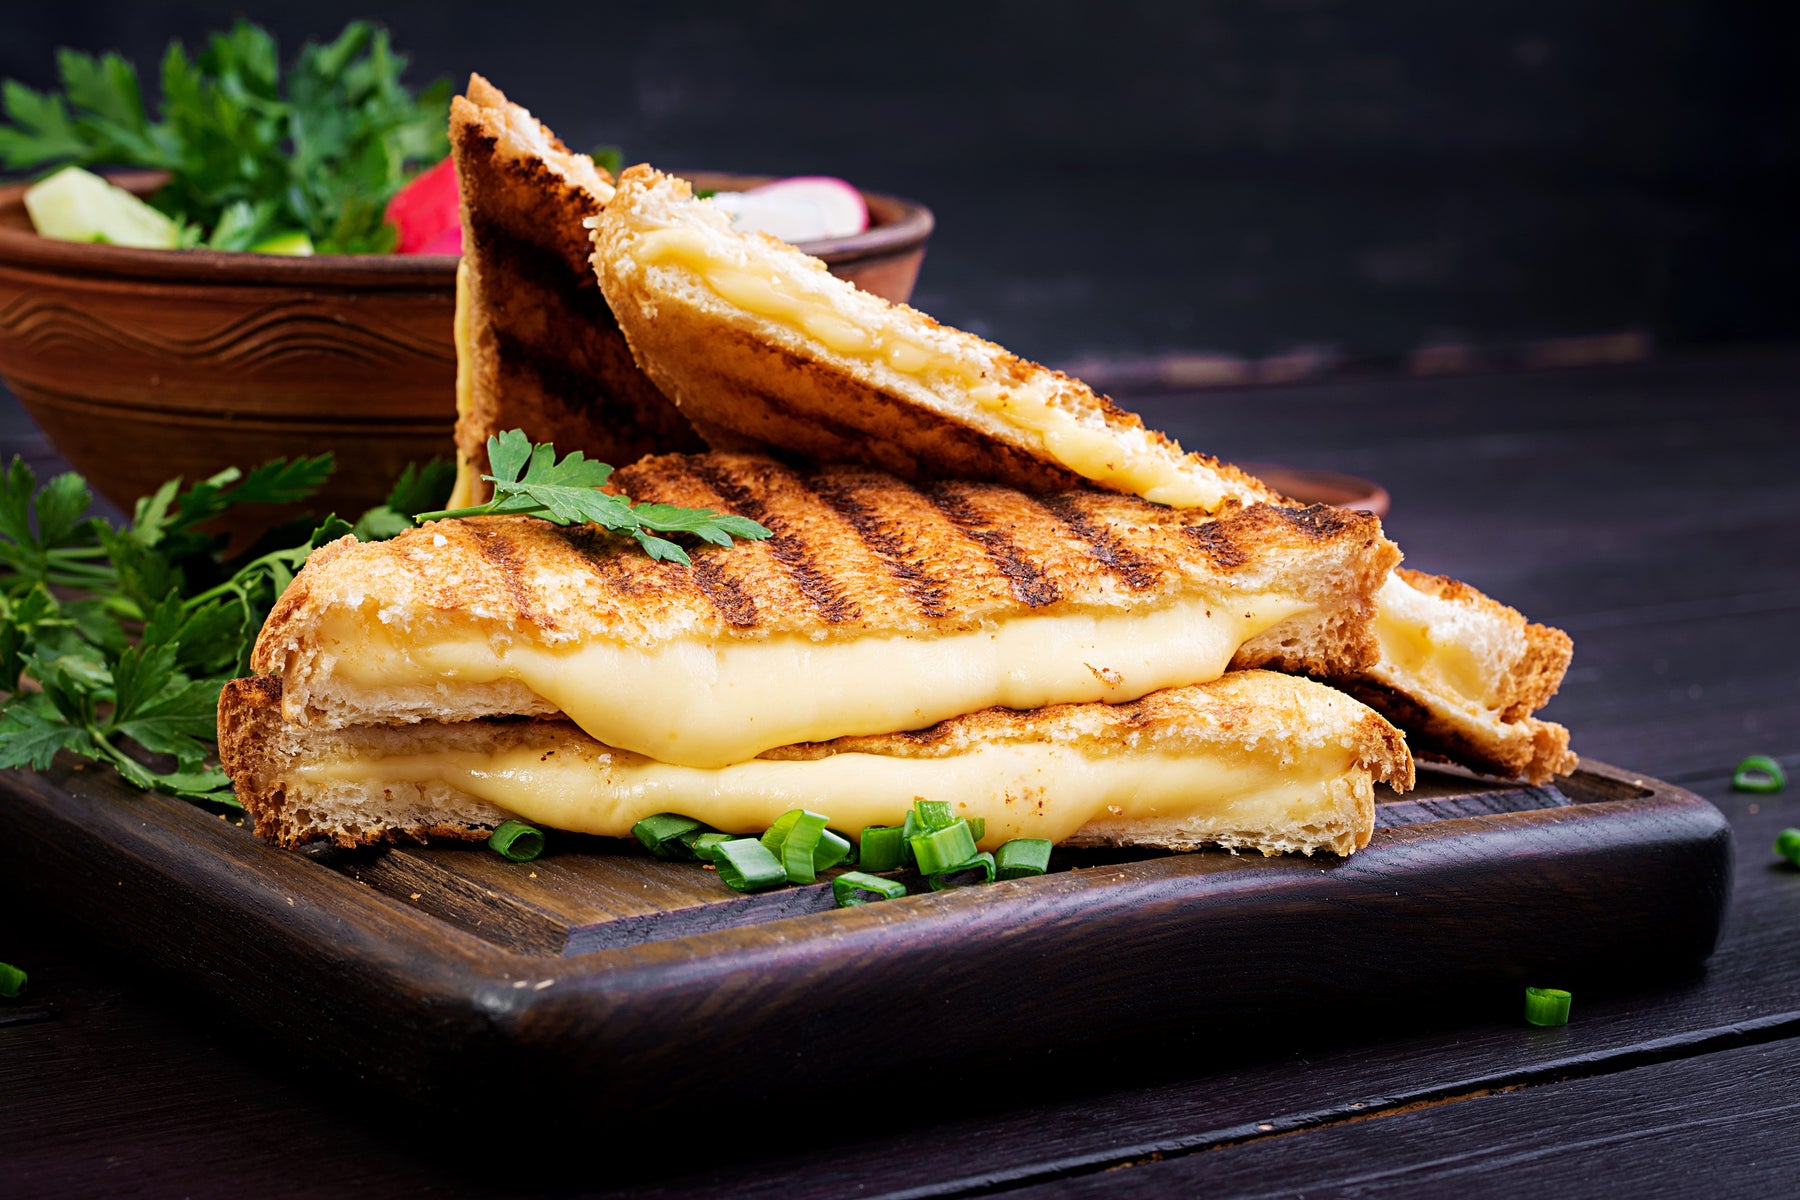 How to Make Ultimate Grilled Cheese Sandwiches